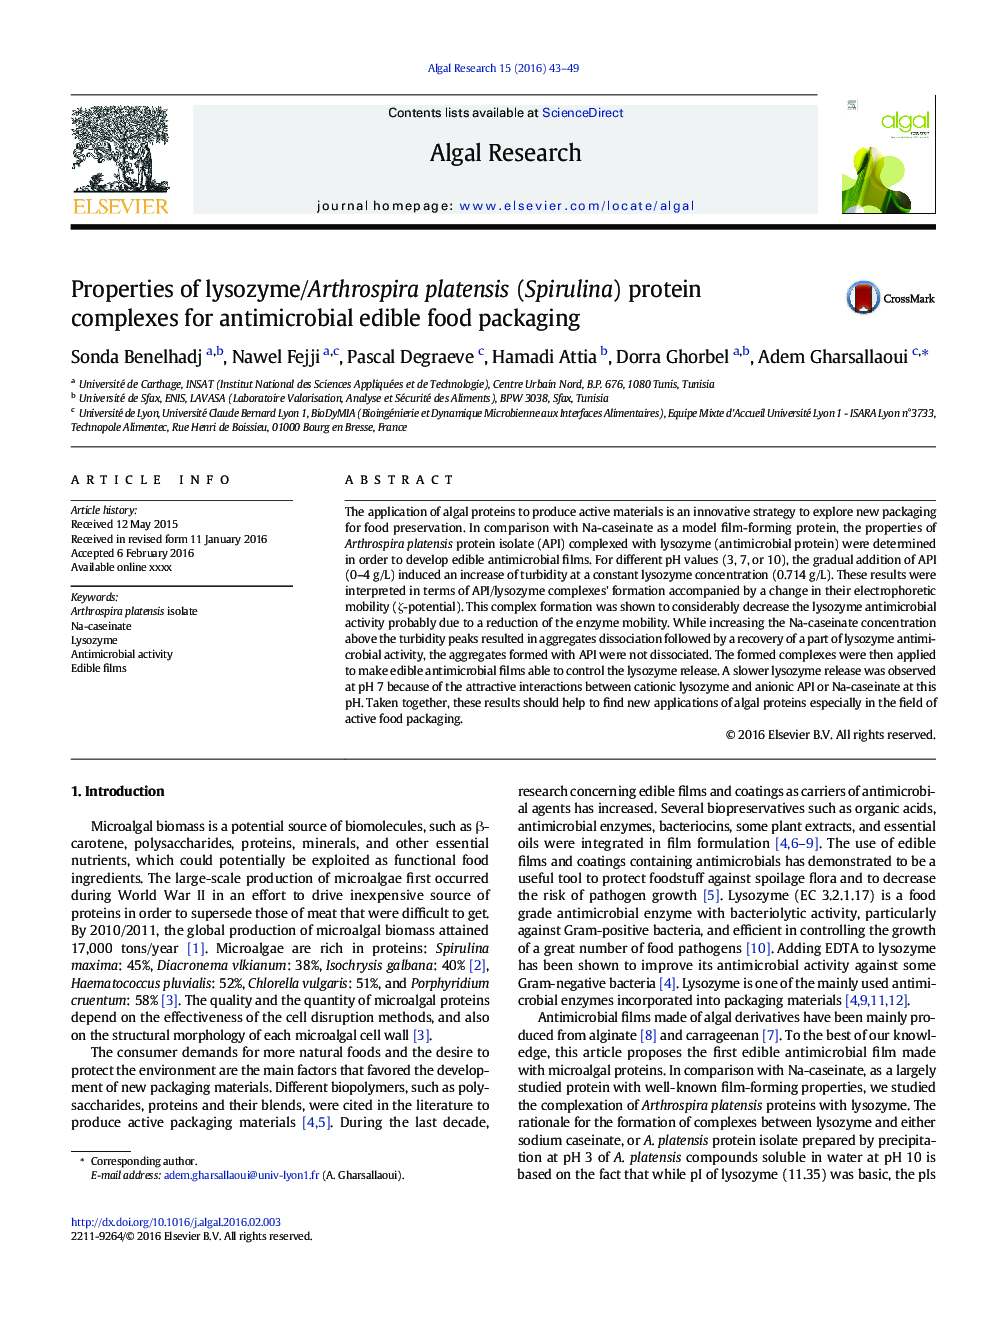 Properties of lysozyme/Arthrospira platensis (Spirulina) protein complexes for antimicrobial edible food packaging